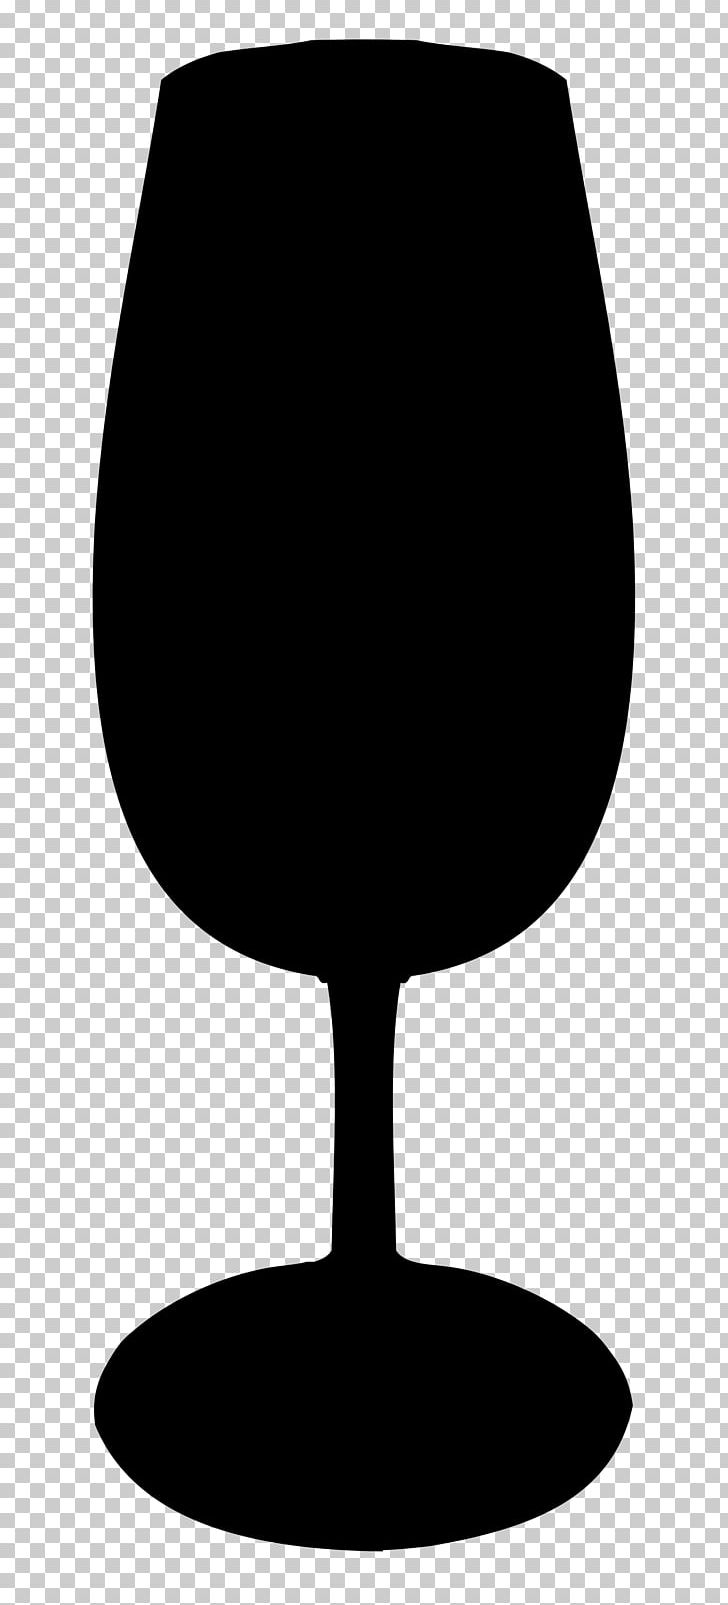 Wine Glass Champagne Glass Black PNG, Clipart, Black, Black And White, Black M, Champagne, Champagne Glass Free PNG Download